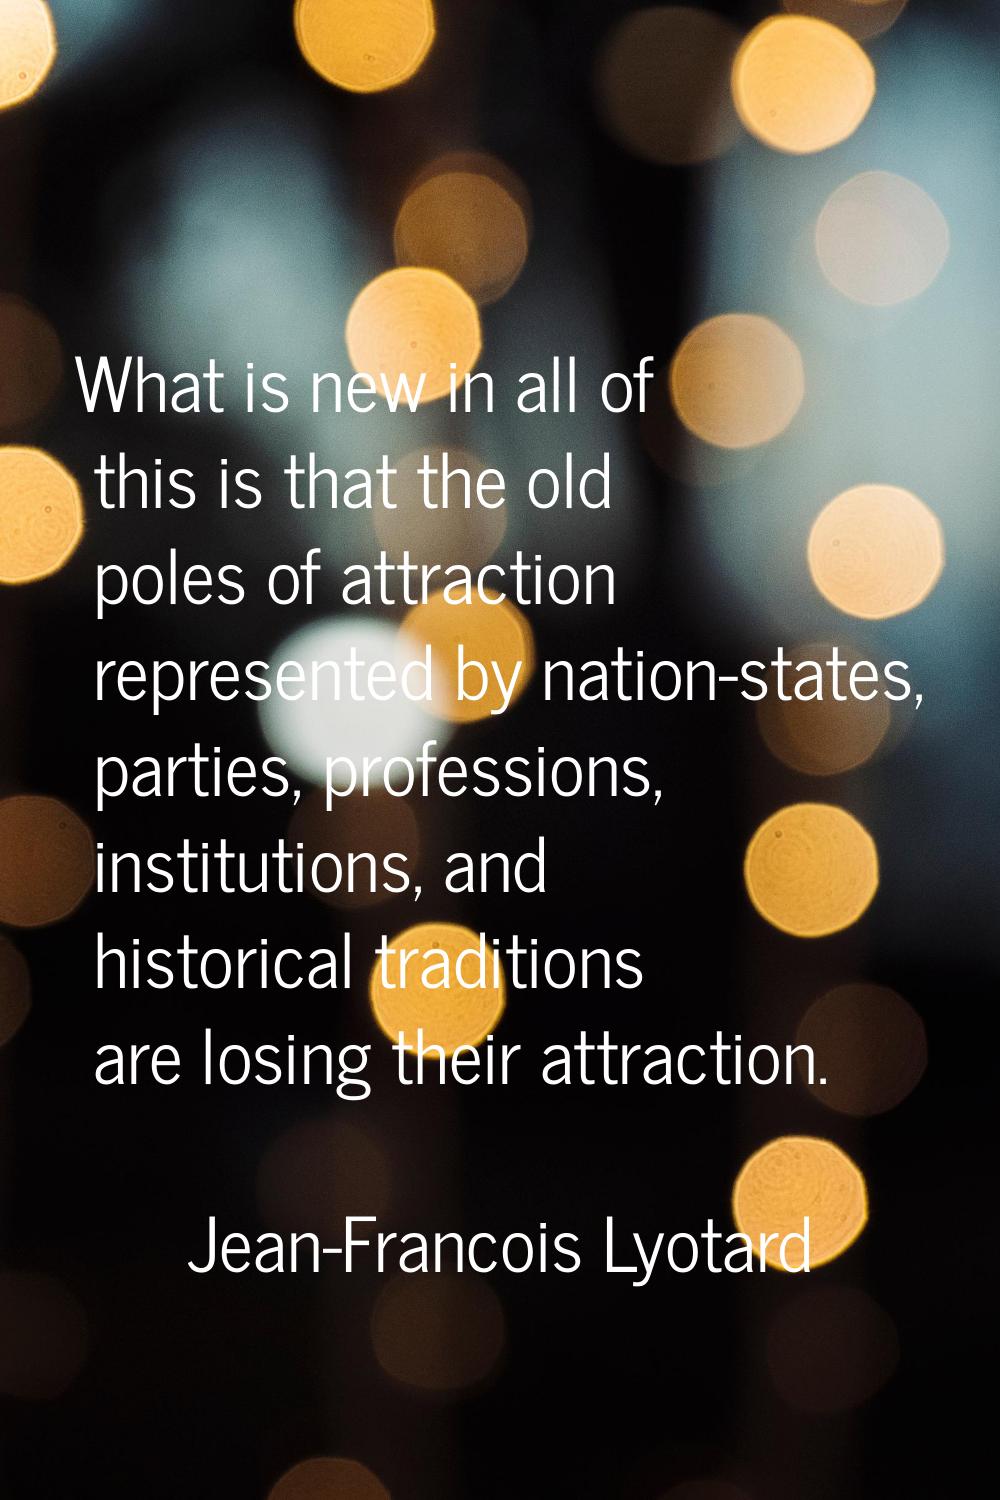 What is new in all of this is that the old poles of attraction represented by nation-states, partie